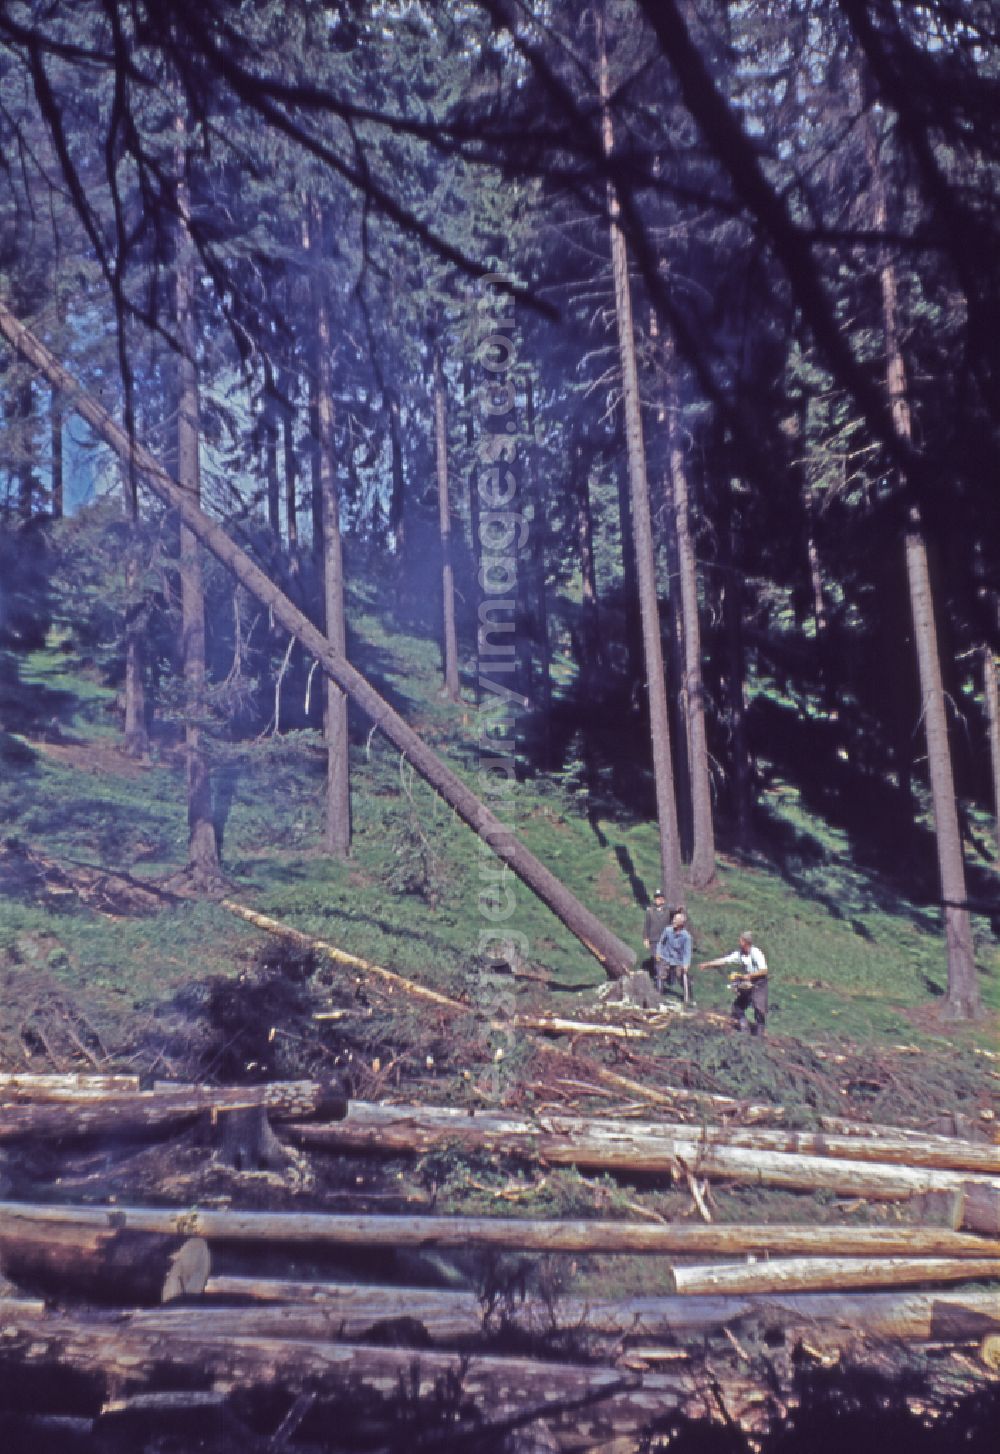 GDR photo archive: Suhl - Tree felling work to obtain logs as raw material for wood processing in a forest and forestry area in Suhl Thueringer Wald, Thuringia on the territory of the former GDR, German Democratic Republic